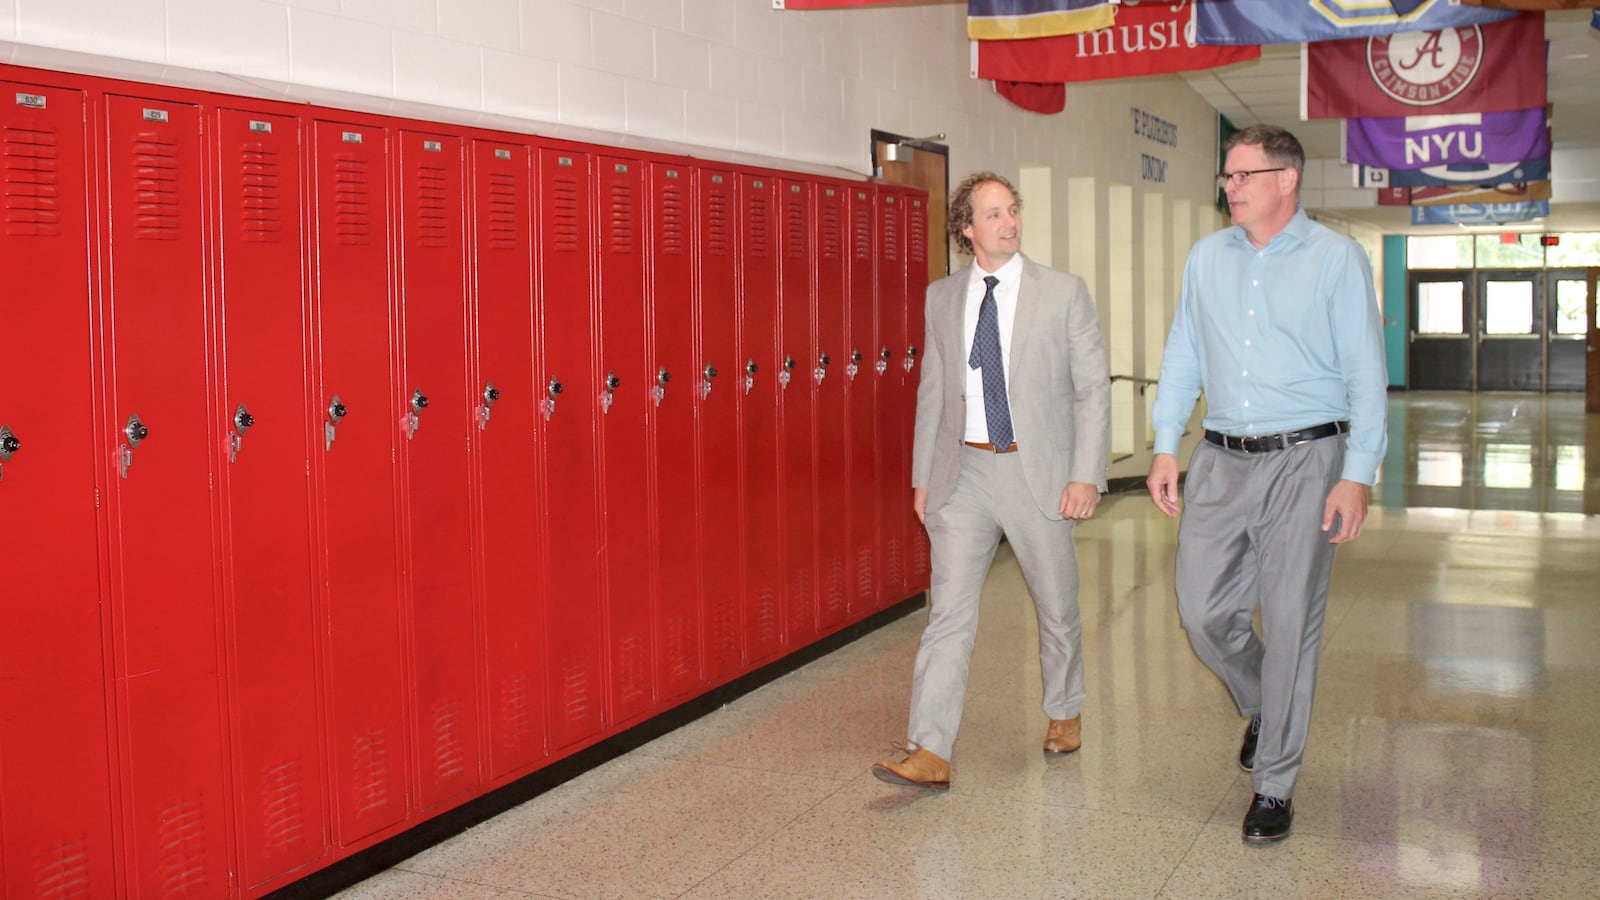 Principal Gary Hughes (right) talks with his supervisor, Craig Hammond, at Nashville's J.T. Moore Middle School. Hammond spends a half day every other week working collaboratively with Hughes under an emerging administrative support and coaching model used by Metropolitan Nashville Public Schools.